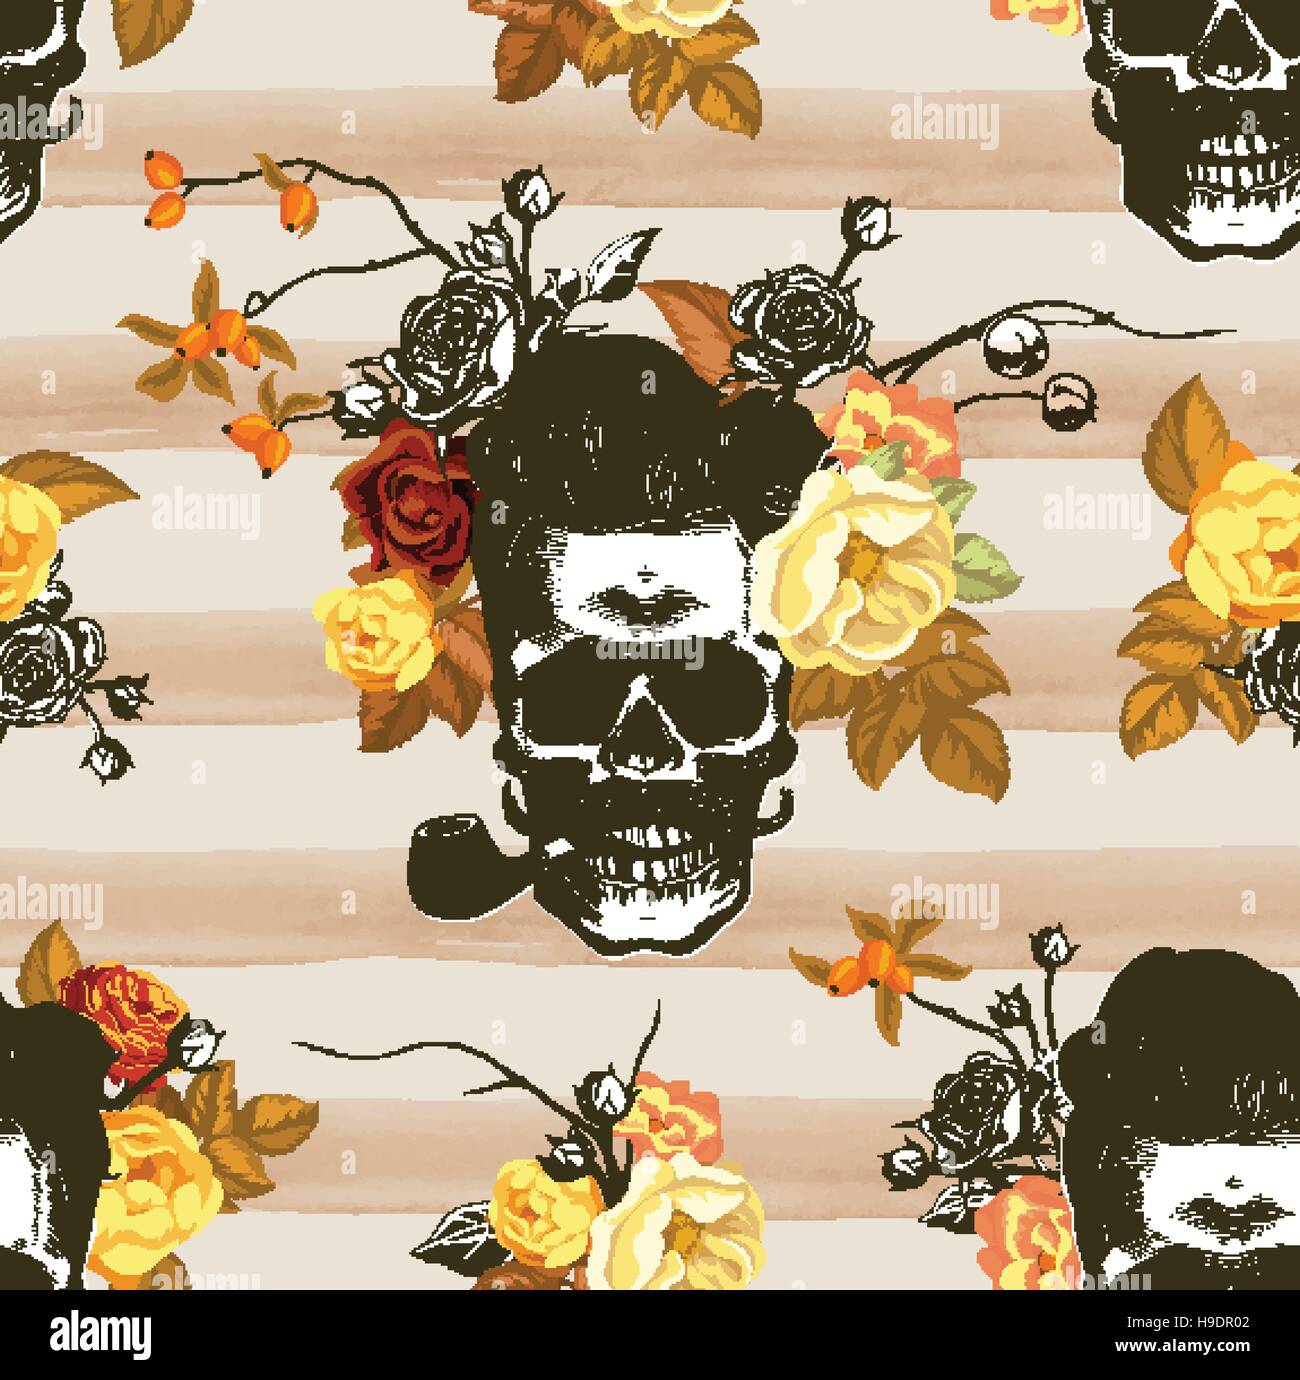 Autumn mood. Seamless pattern with the skulls, flowers and leaves in the background. Skull silhouette in engraving style. Vector illustration Stock Vector